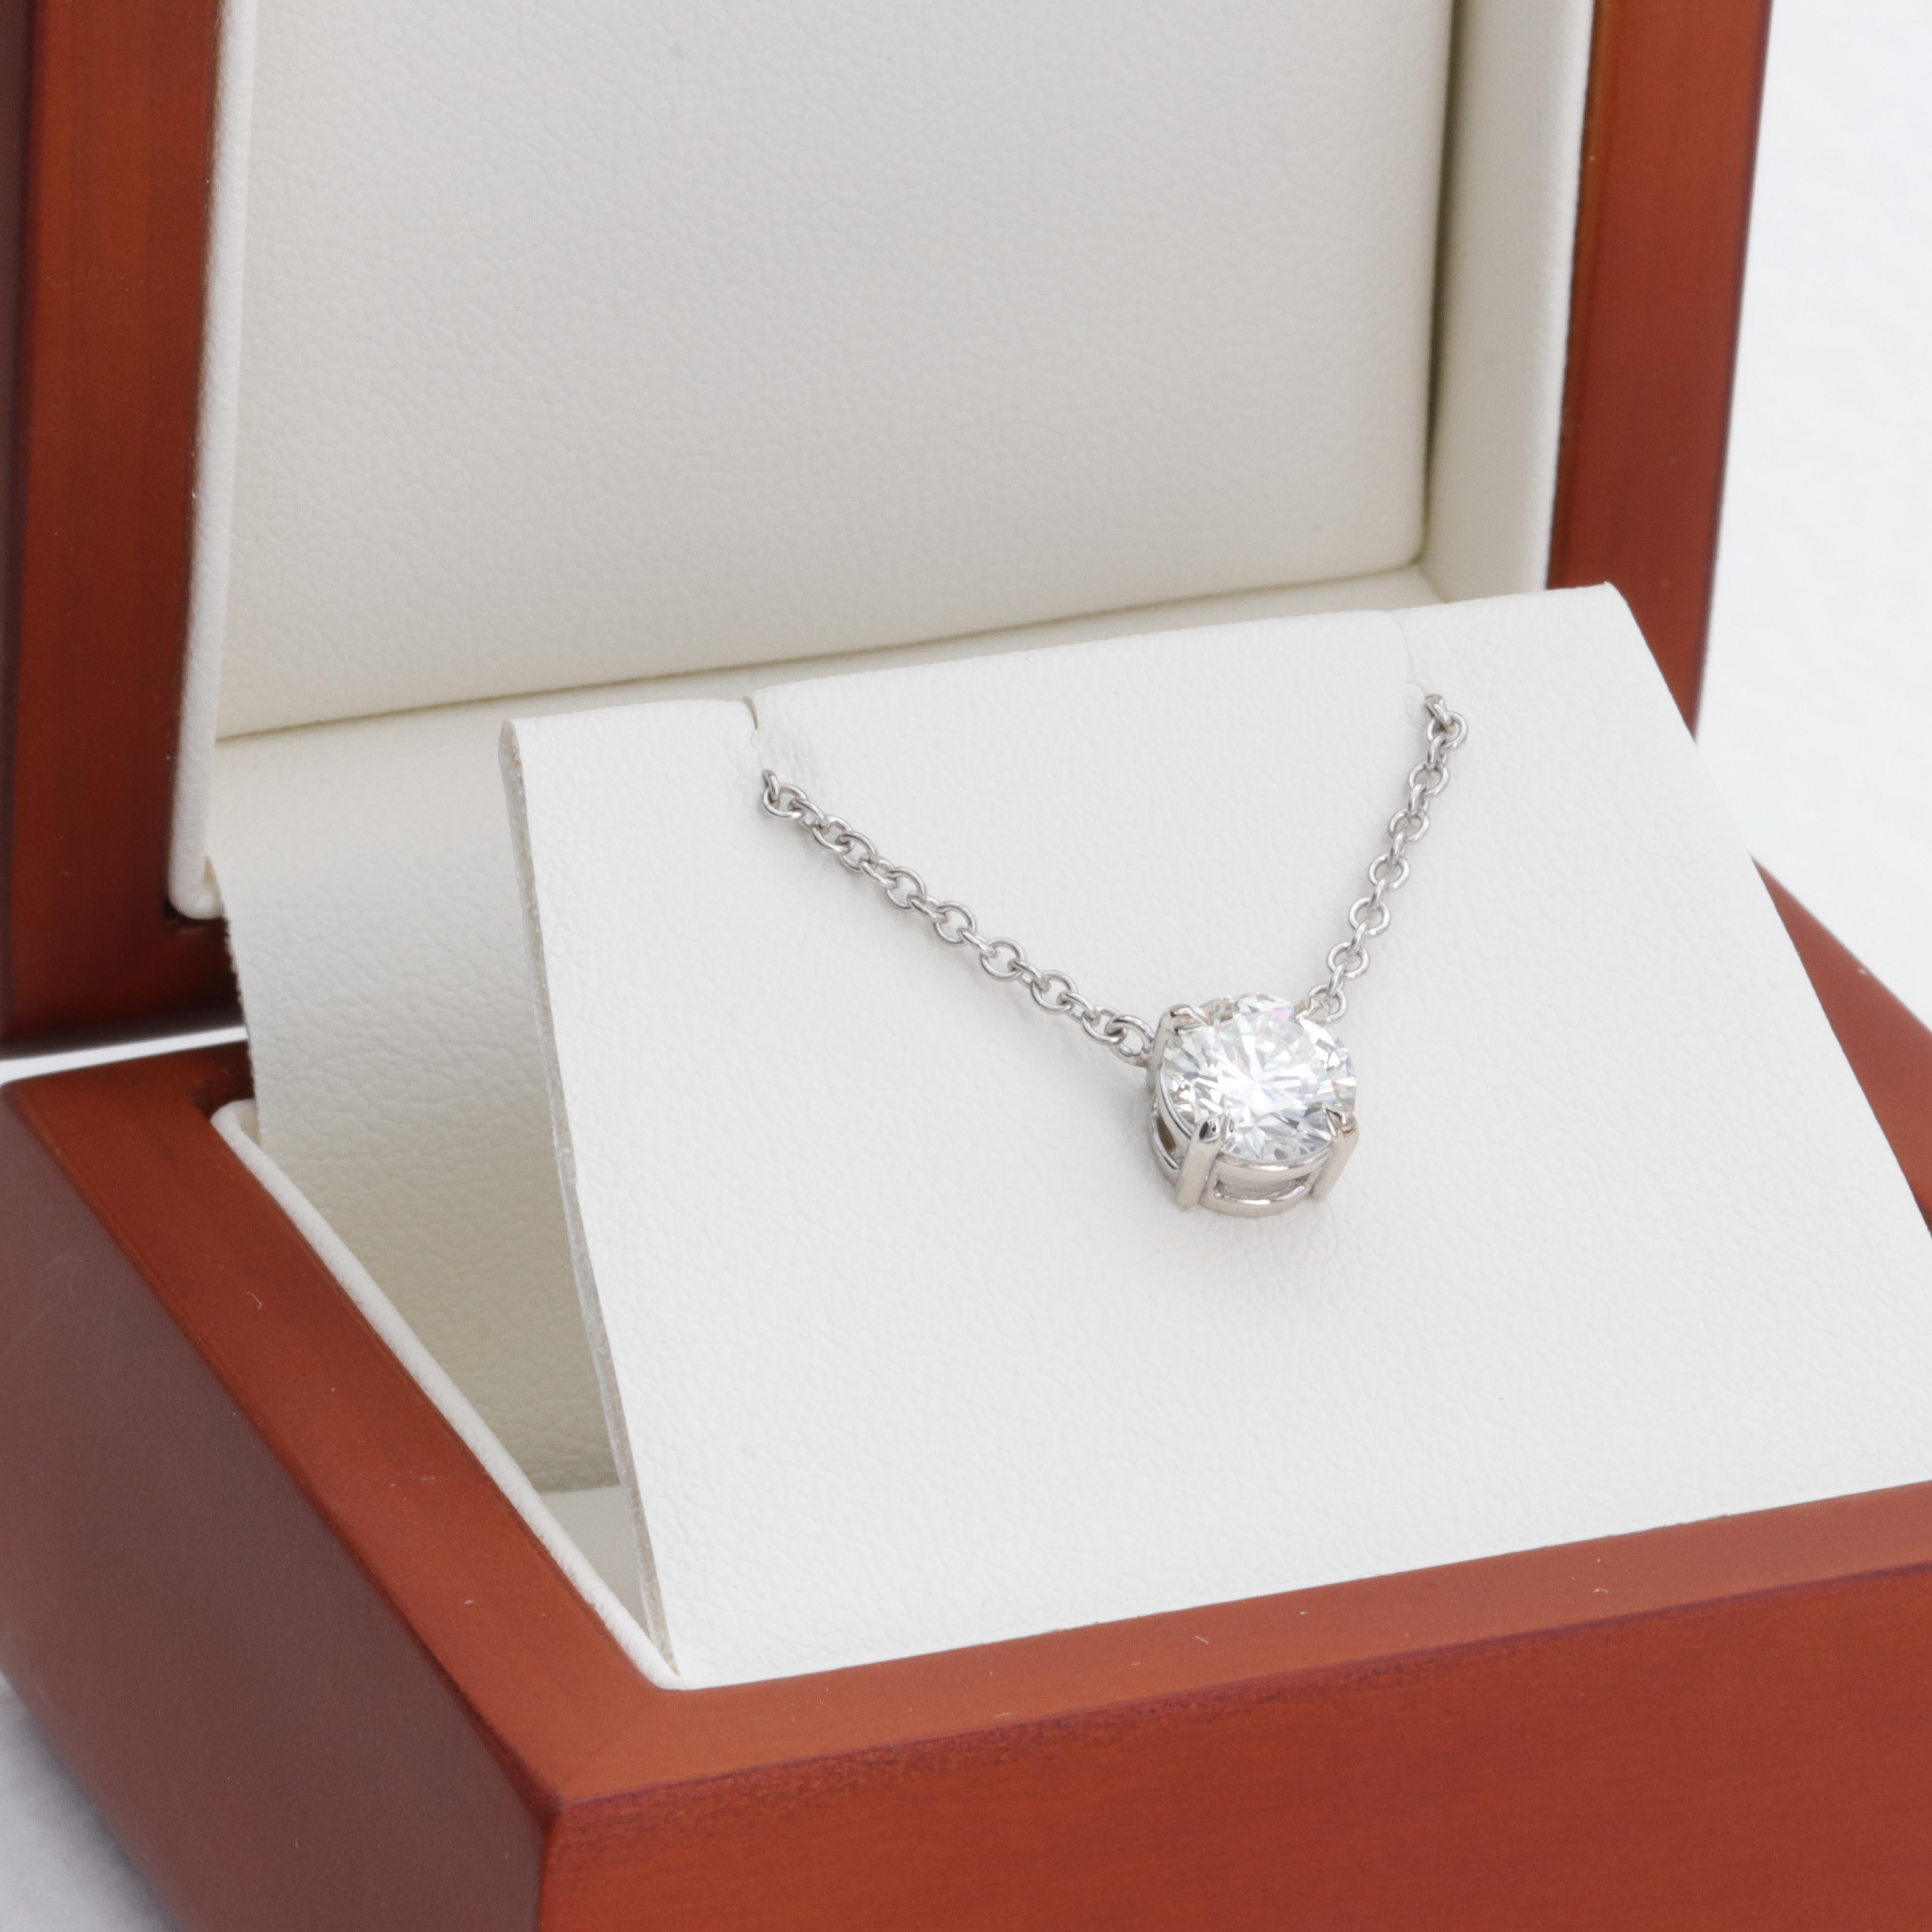 This new and finely made solitaire pendant necklace features a 1.11 carat J color VS1 clarity round brilliant cut natural diamond accompanied by an original GIA report. 

The diamond has a bright face up appearance with a very clean VS1 clarity that